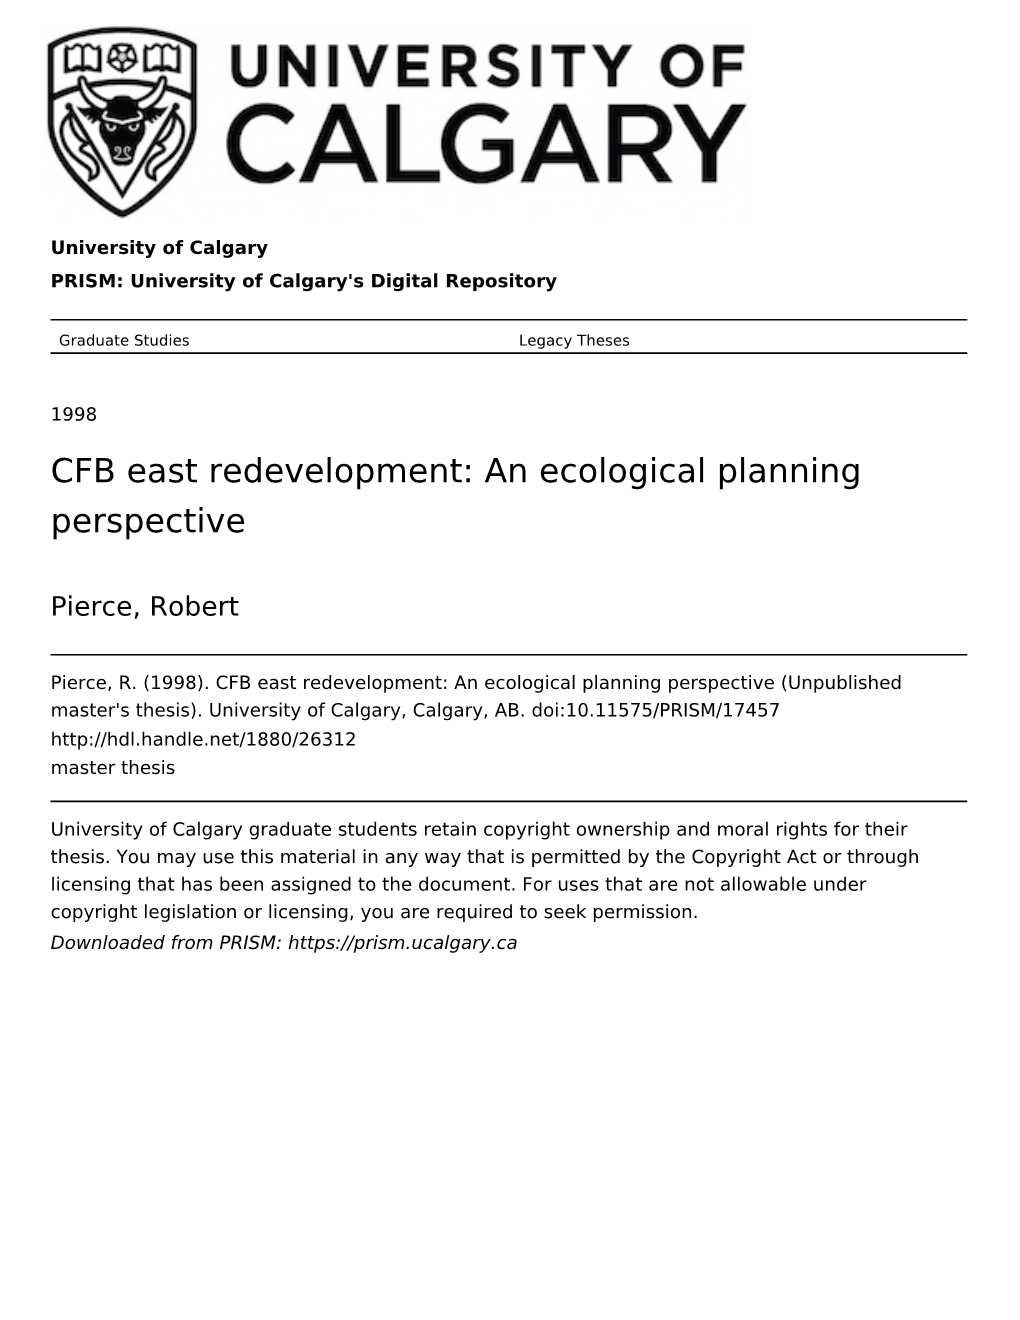 CFB East Redevelopment: an Ecological Planning Perspective